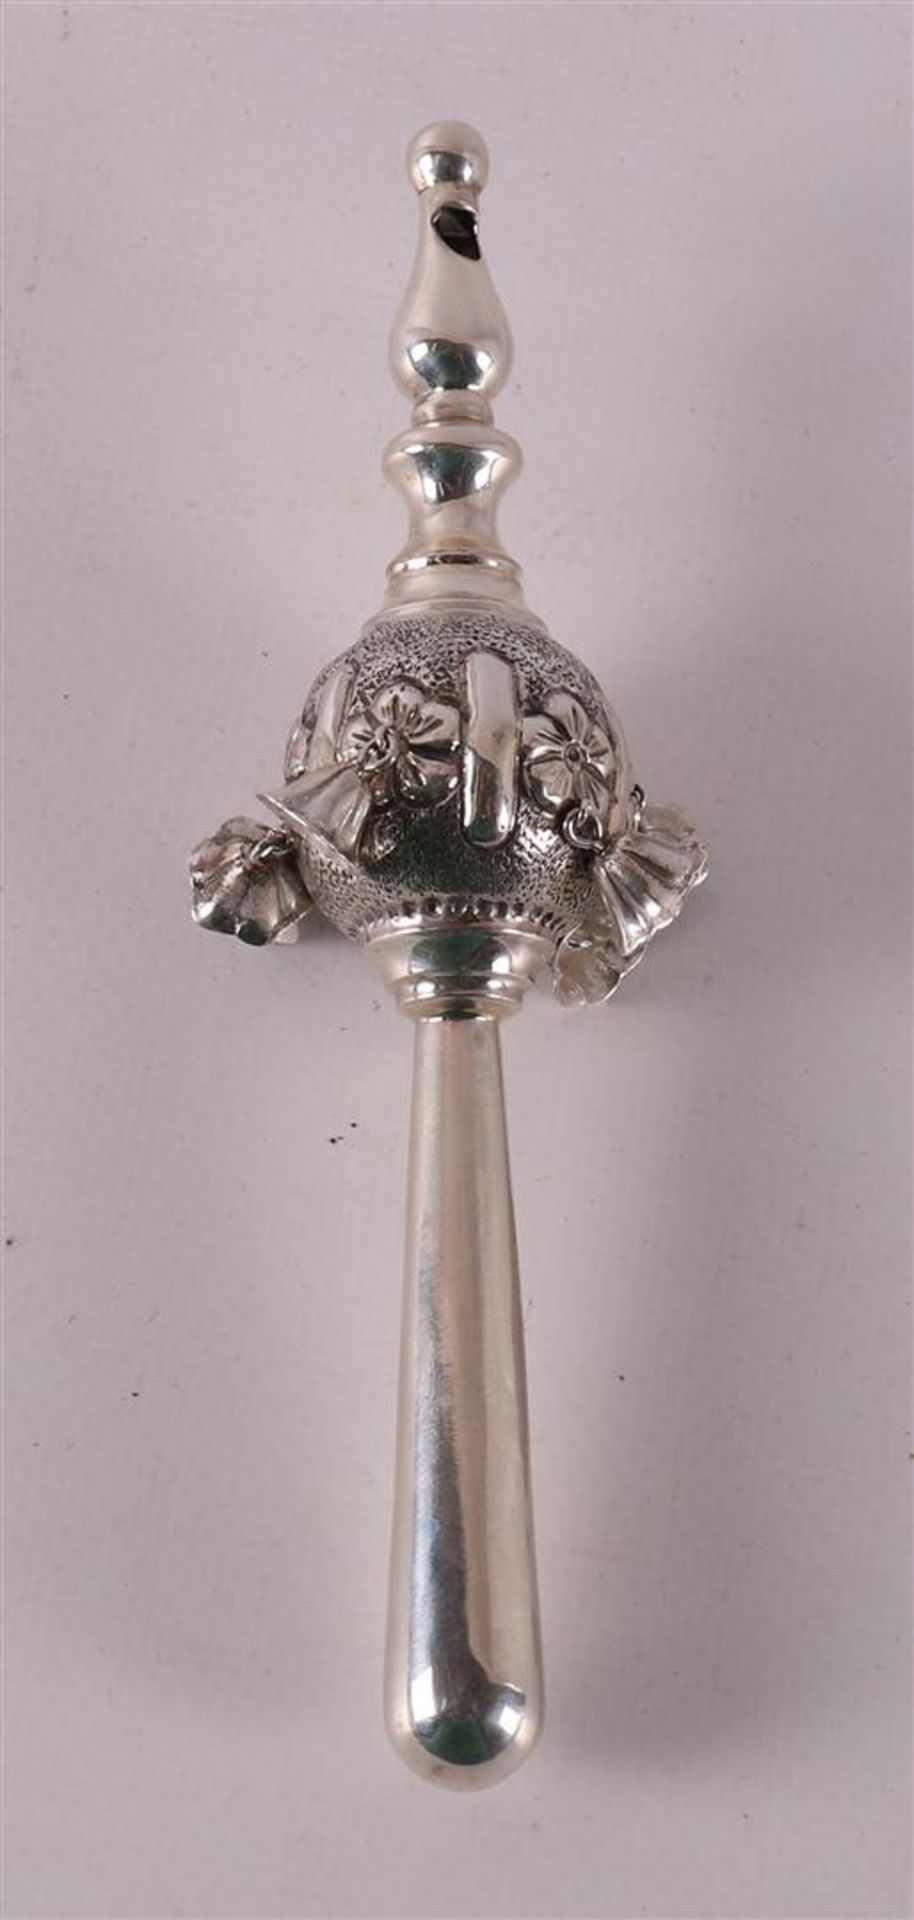 A silver rattle with whistle, 20th century.